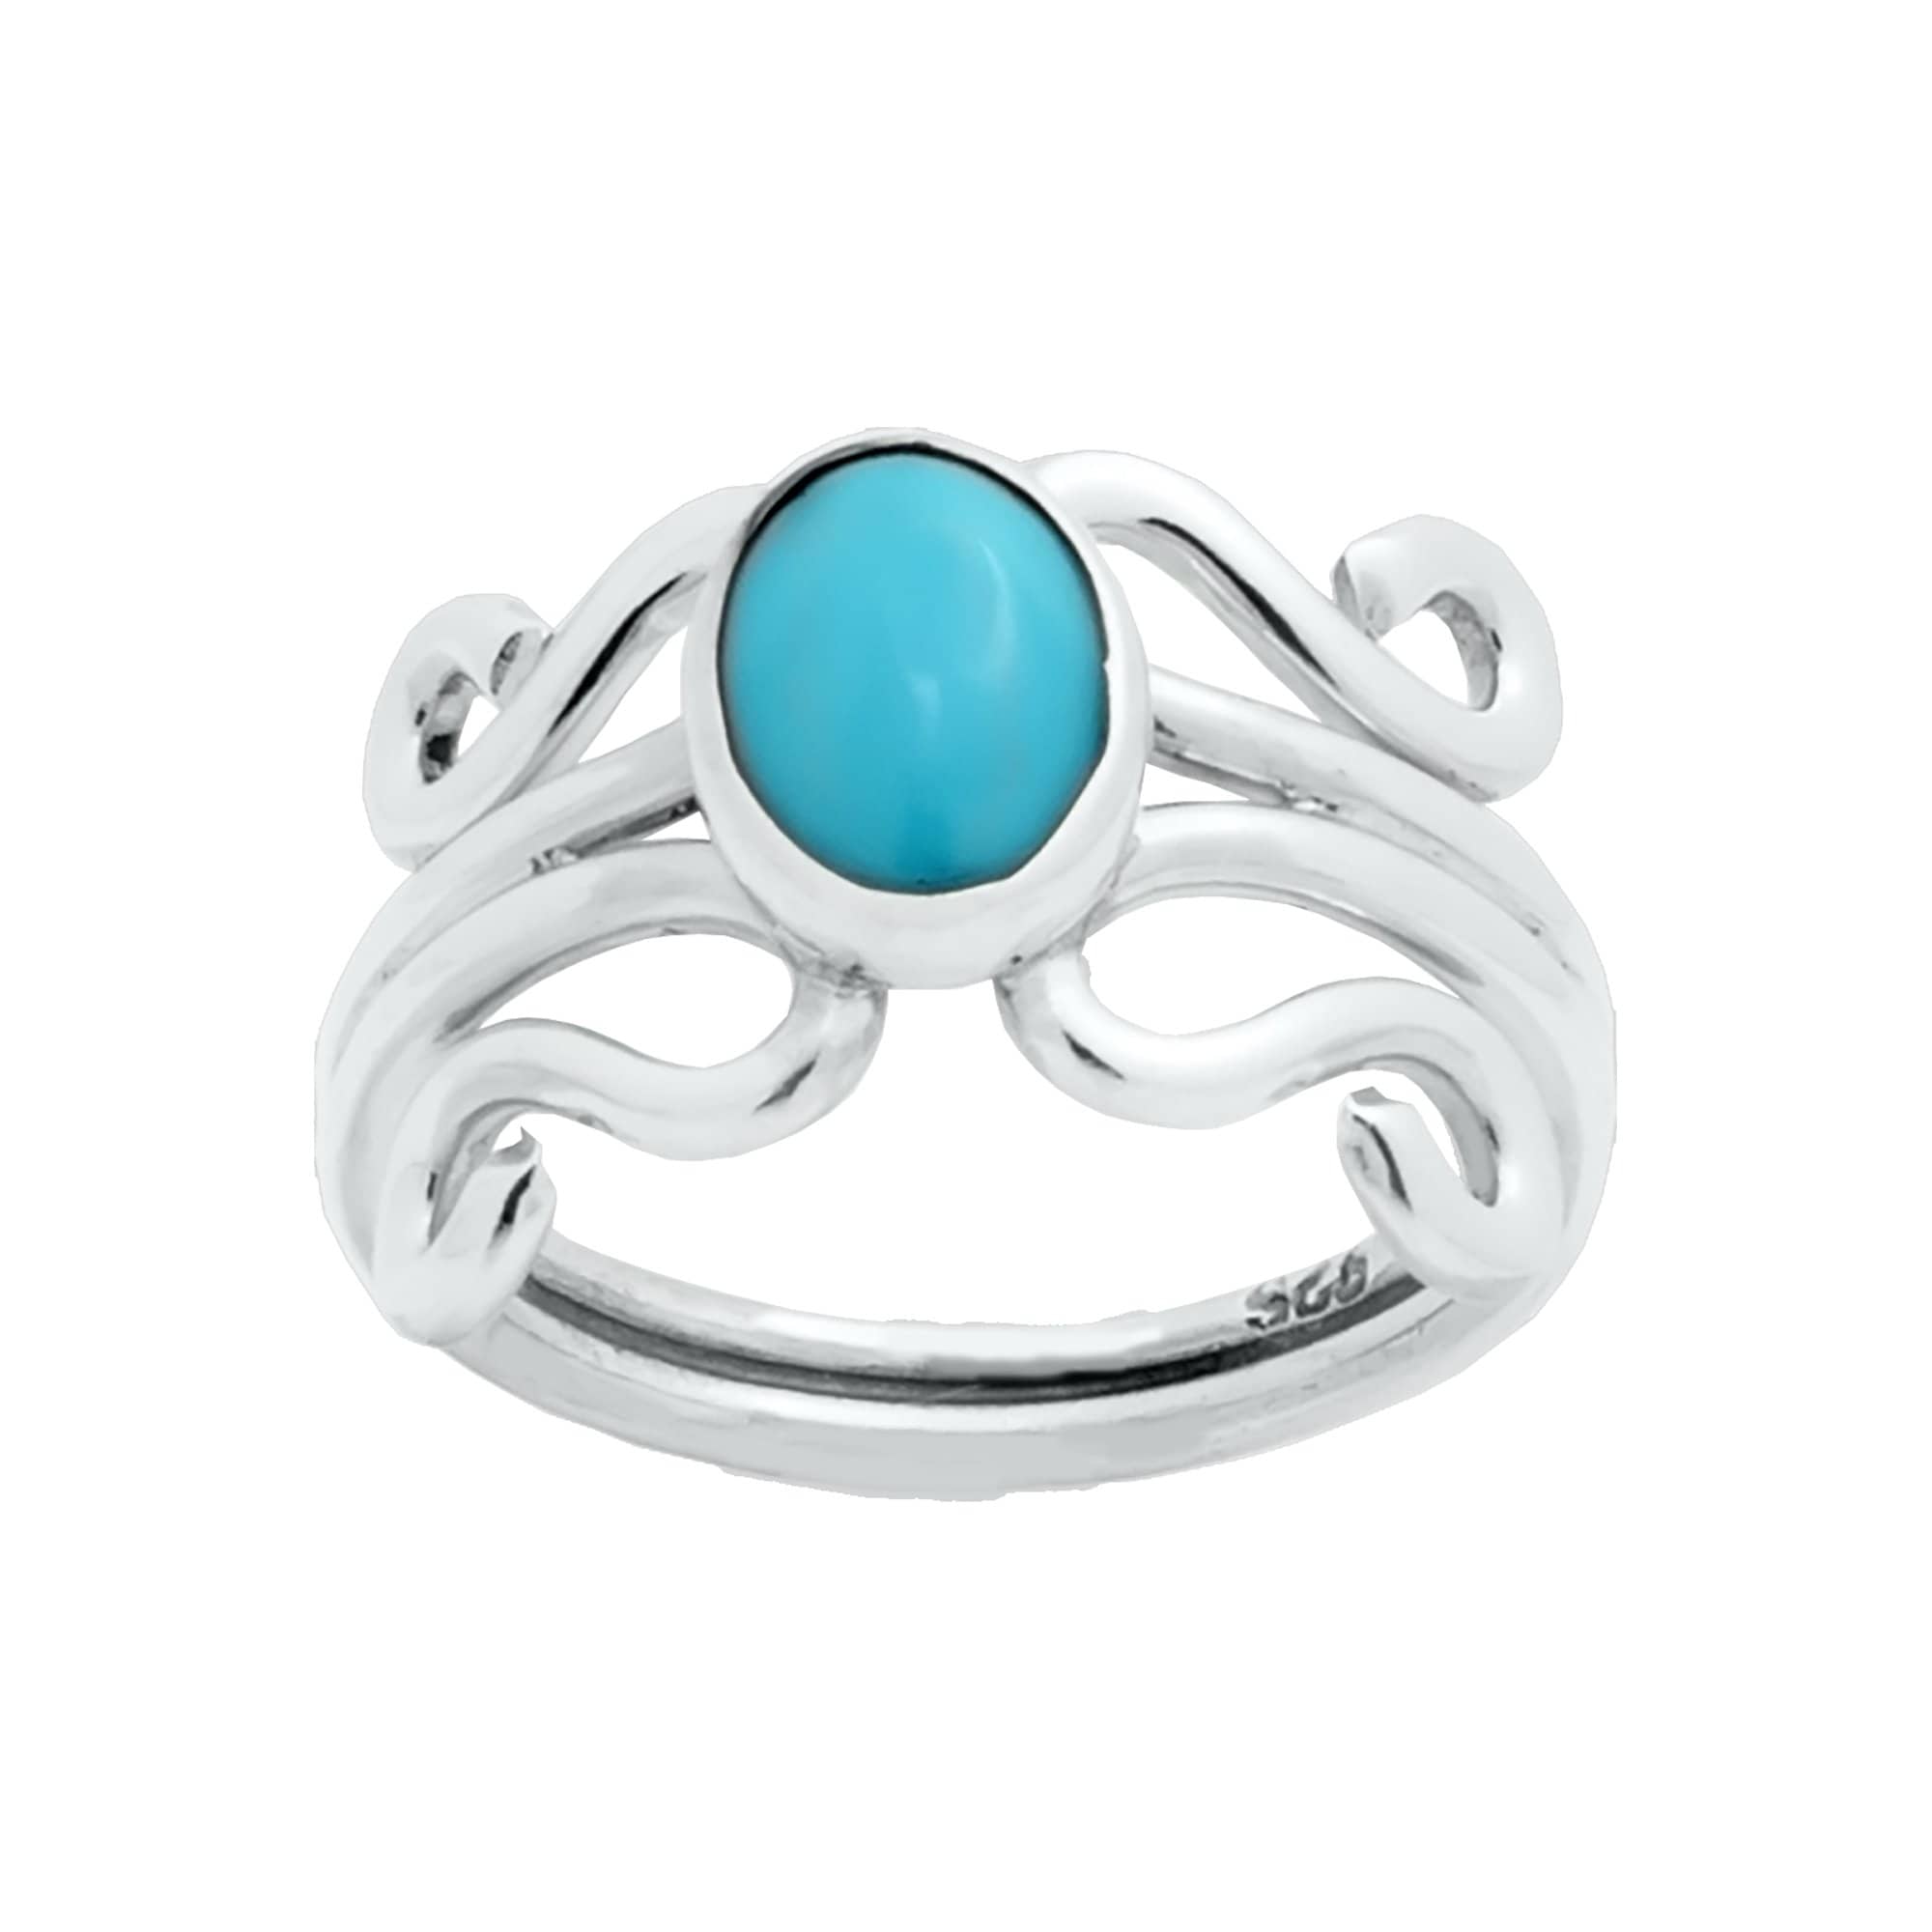 RG.FEL.1104 - Turquoise Ring, Handcrafted with Sterling Silver